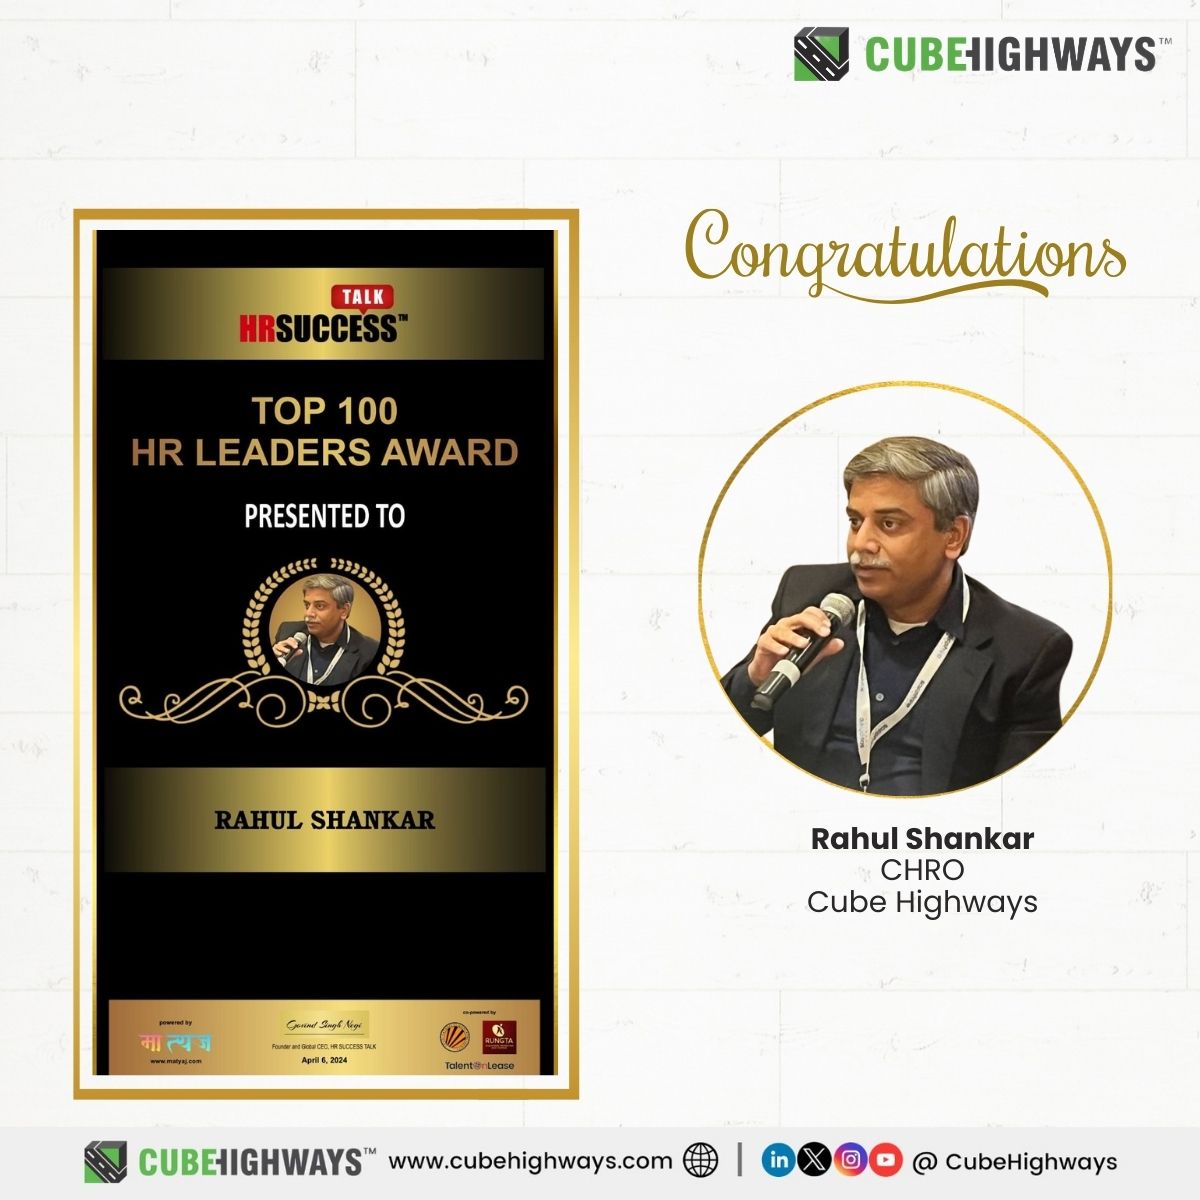 We are thrilled to announce that Rahul Shankar, CHRO, @CubeHighways has been honoured as one of the Top 100 HR Leaders at the prestigious @HRSUCCESSTALK1 Annual Tech HR Conference & Awards 2024.
 
Congratulations on this well-deserved recognition!
 
#HRLeadership #CHRO #HRTech